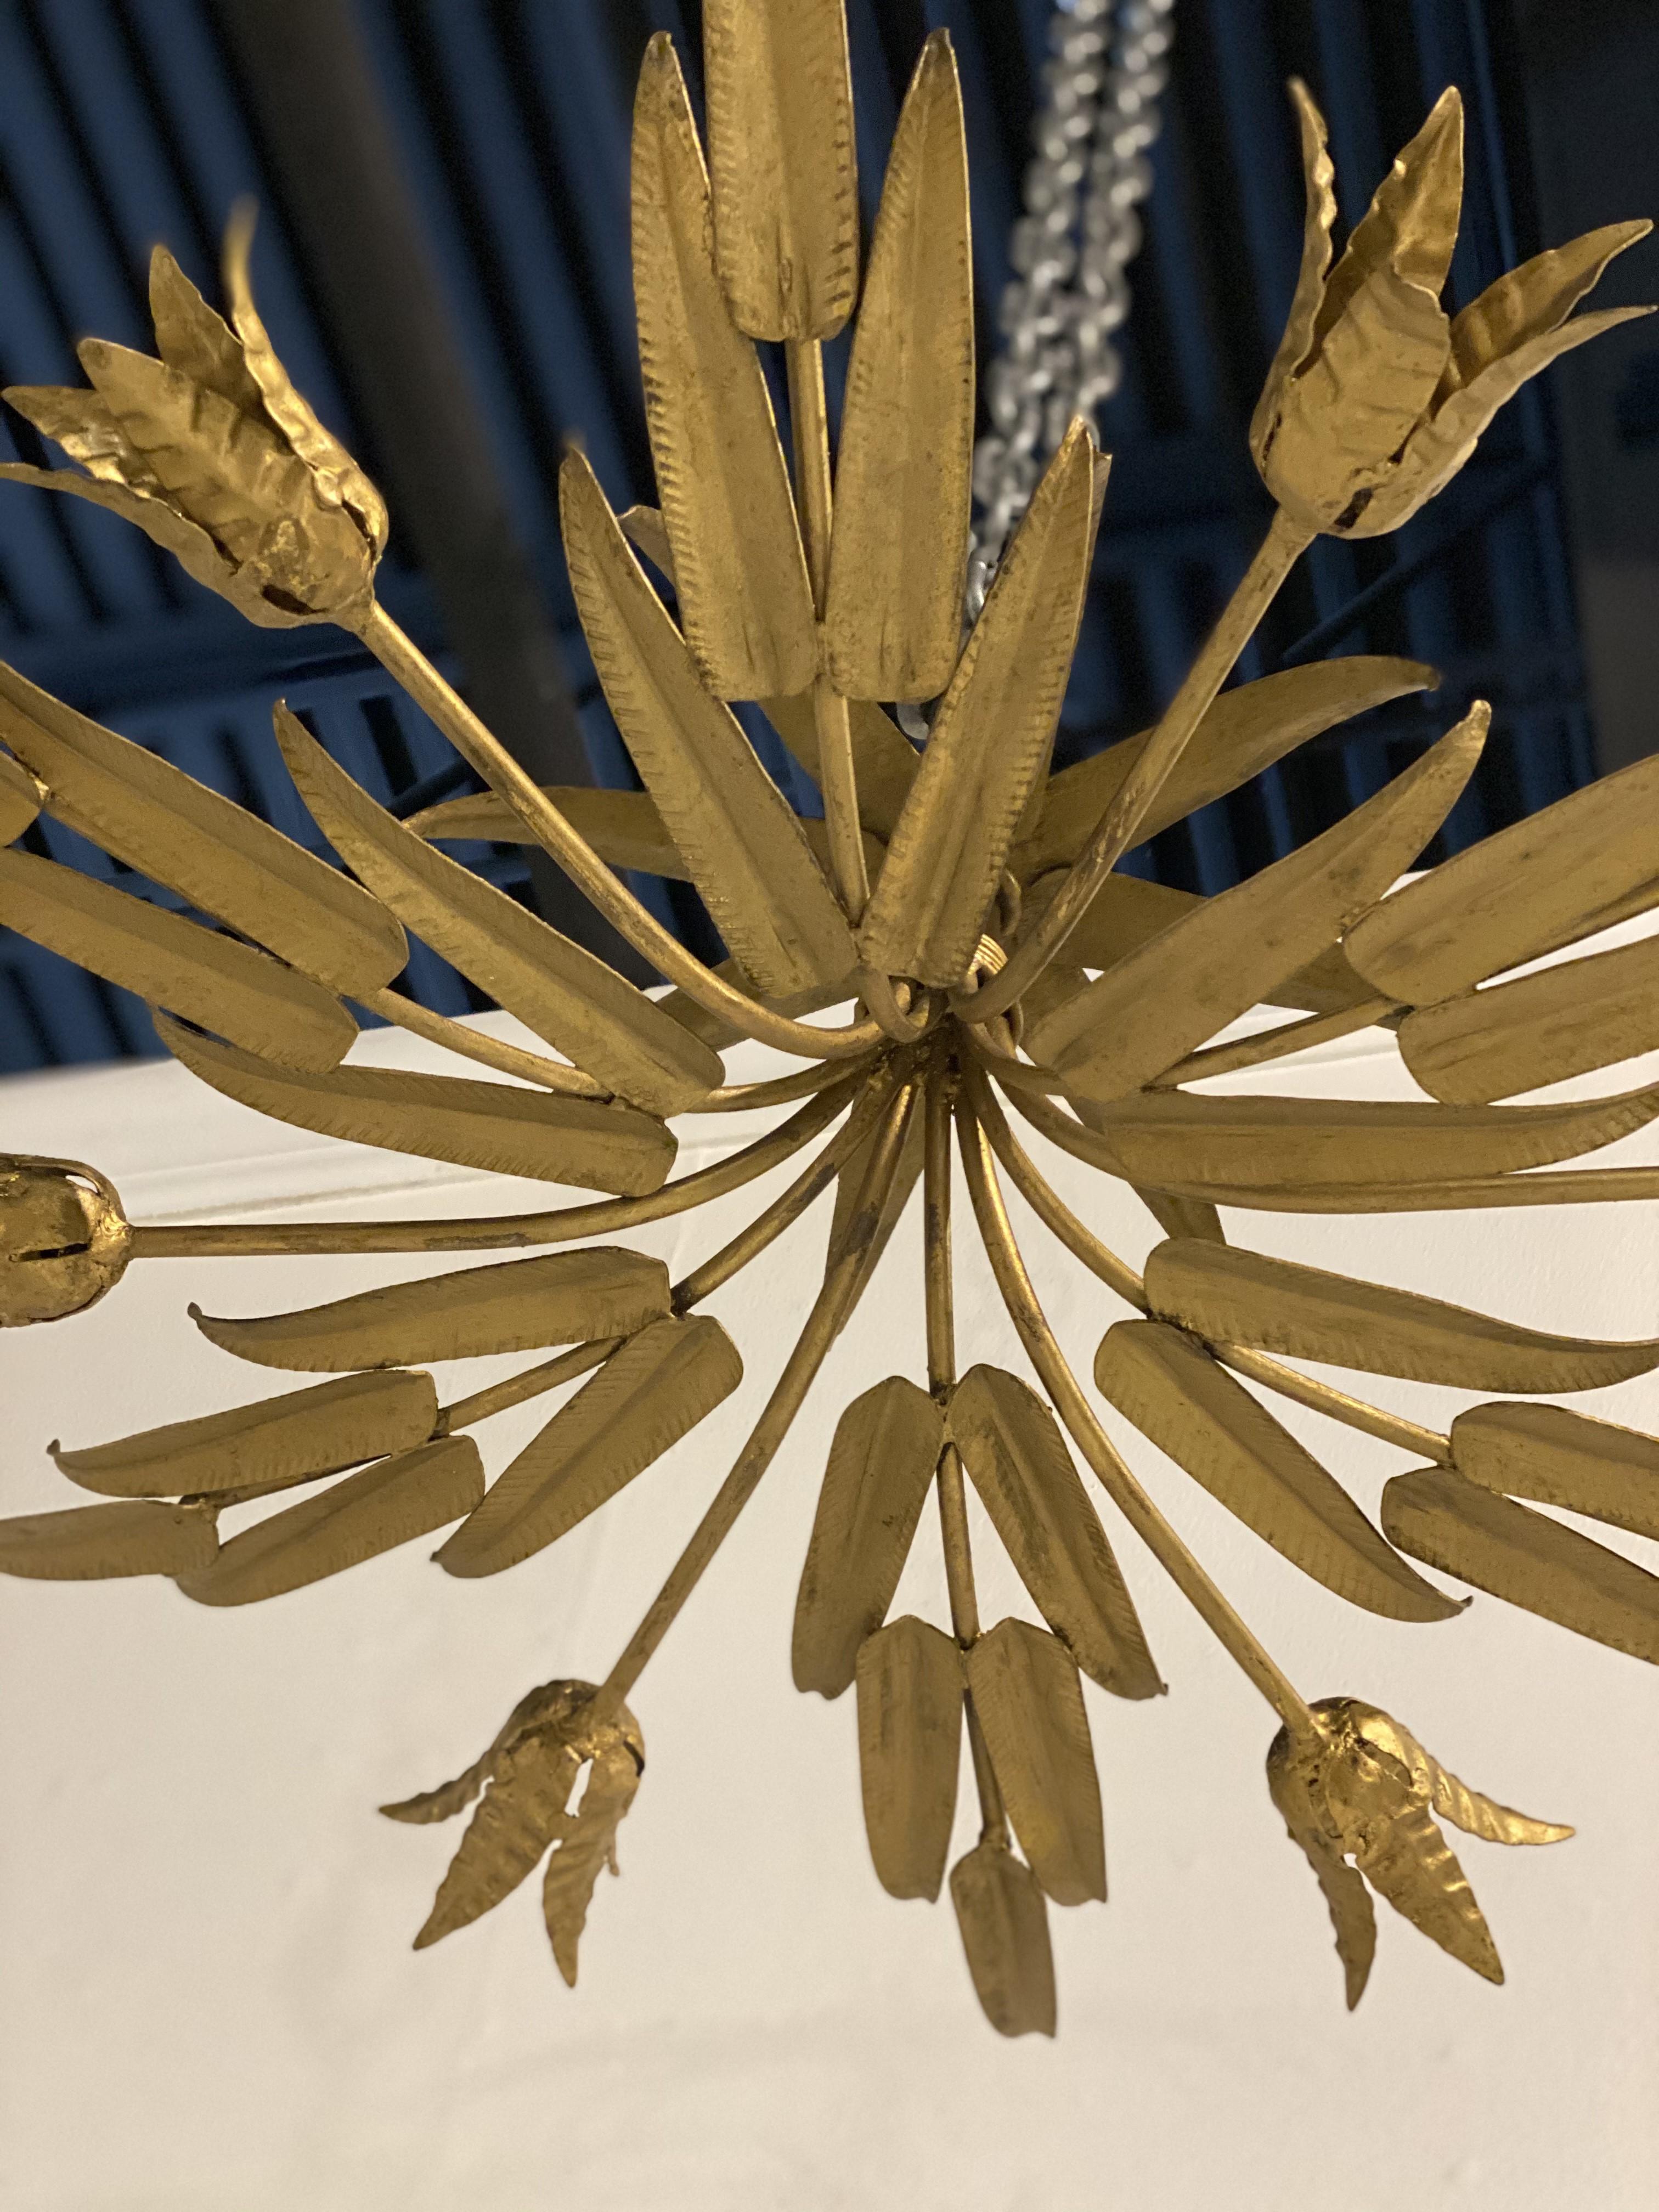 French Provincial 1930's French Sunburst Light Fixture  For Sale